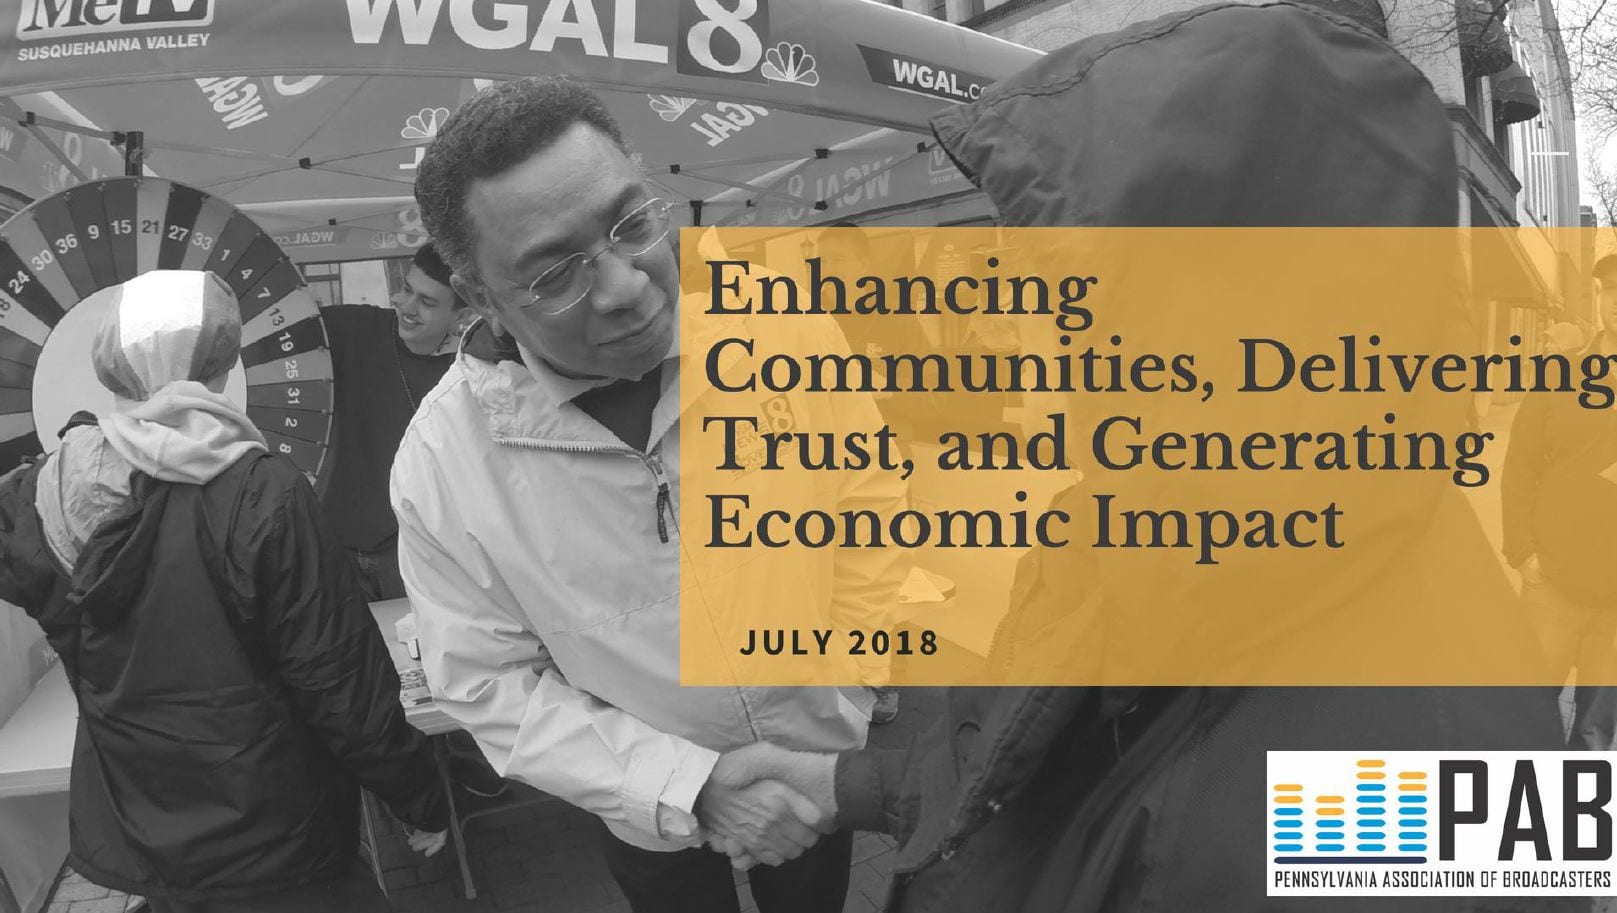 Enhancing Communities, Delivering Trust, and Generating Economic Impact